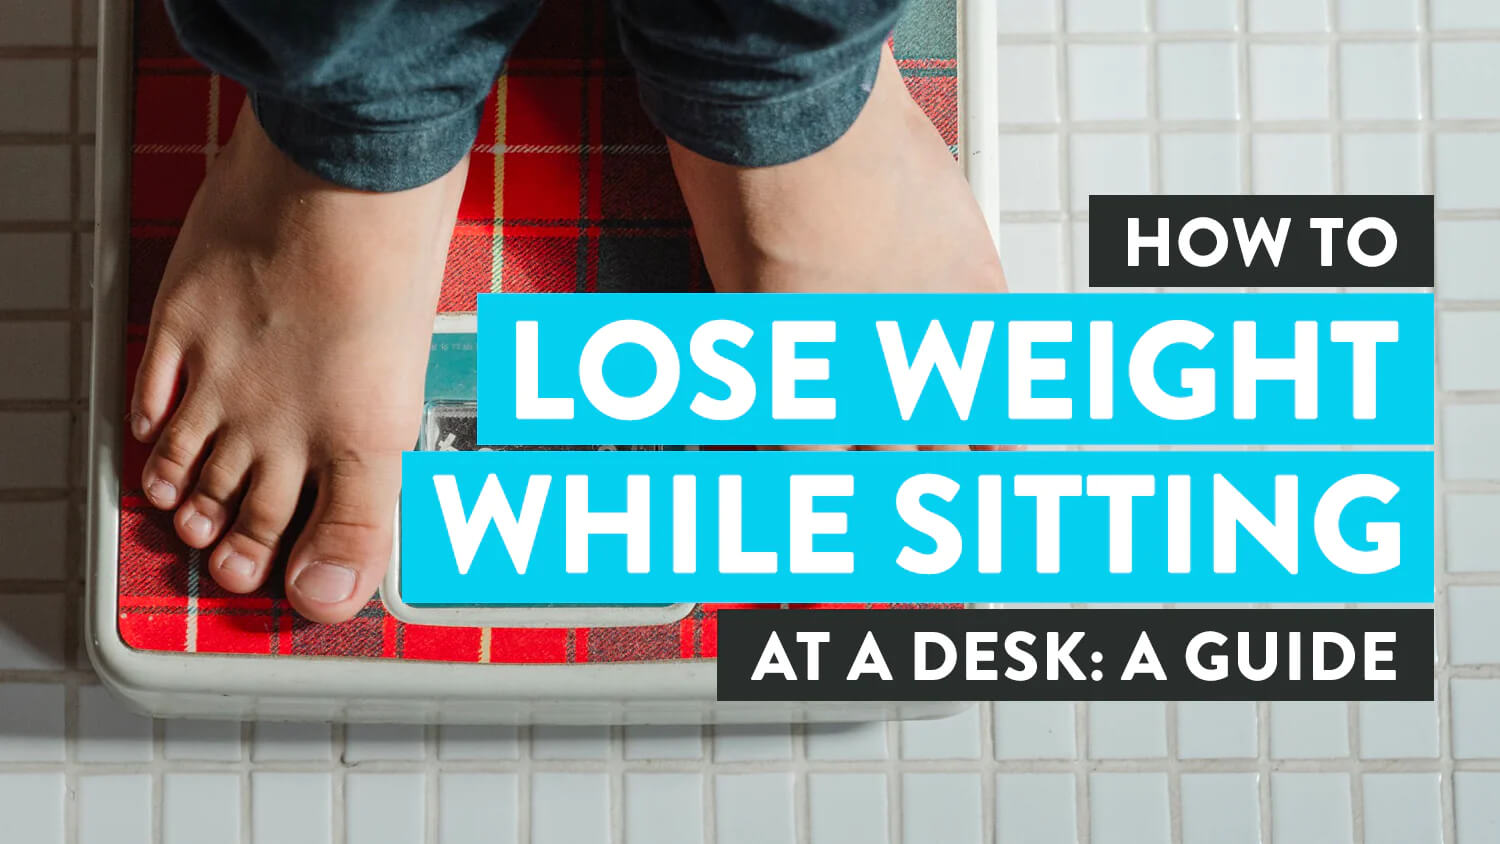 Everything You Need to Know to Lose Weight at Your Desk: Health Guide -  Desky USA